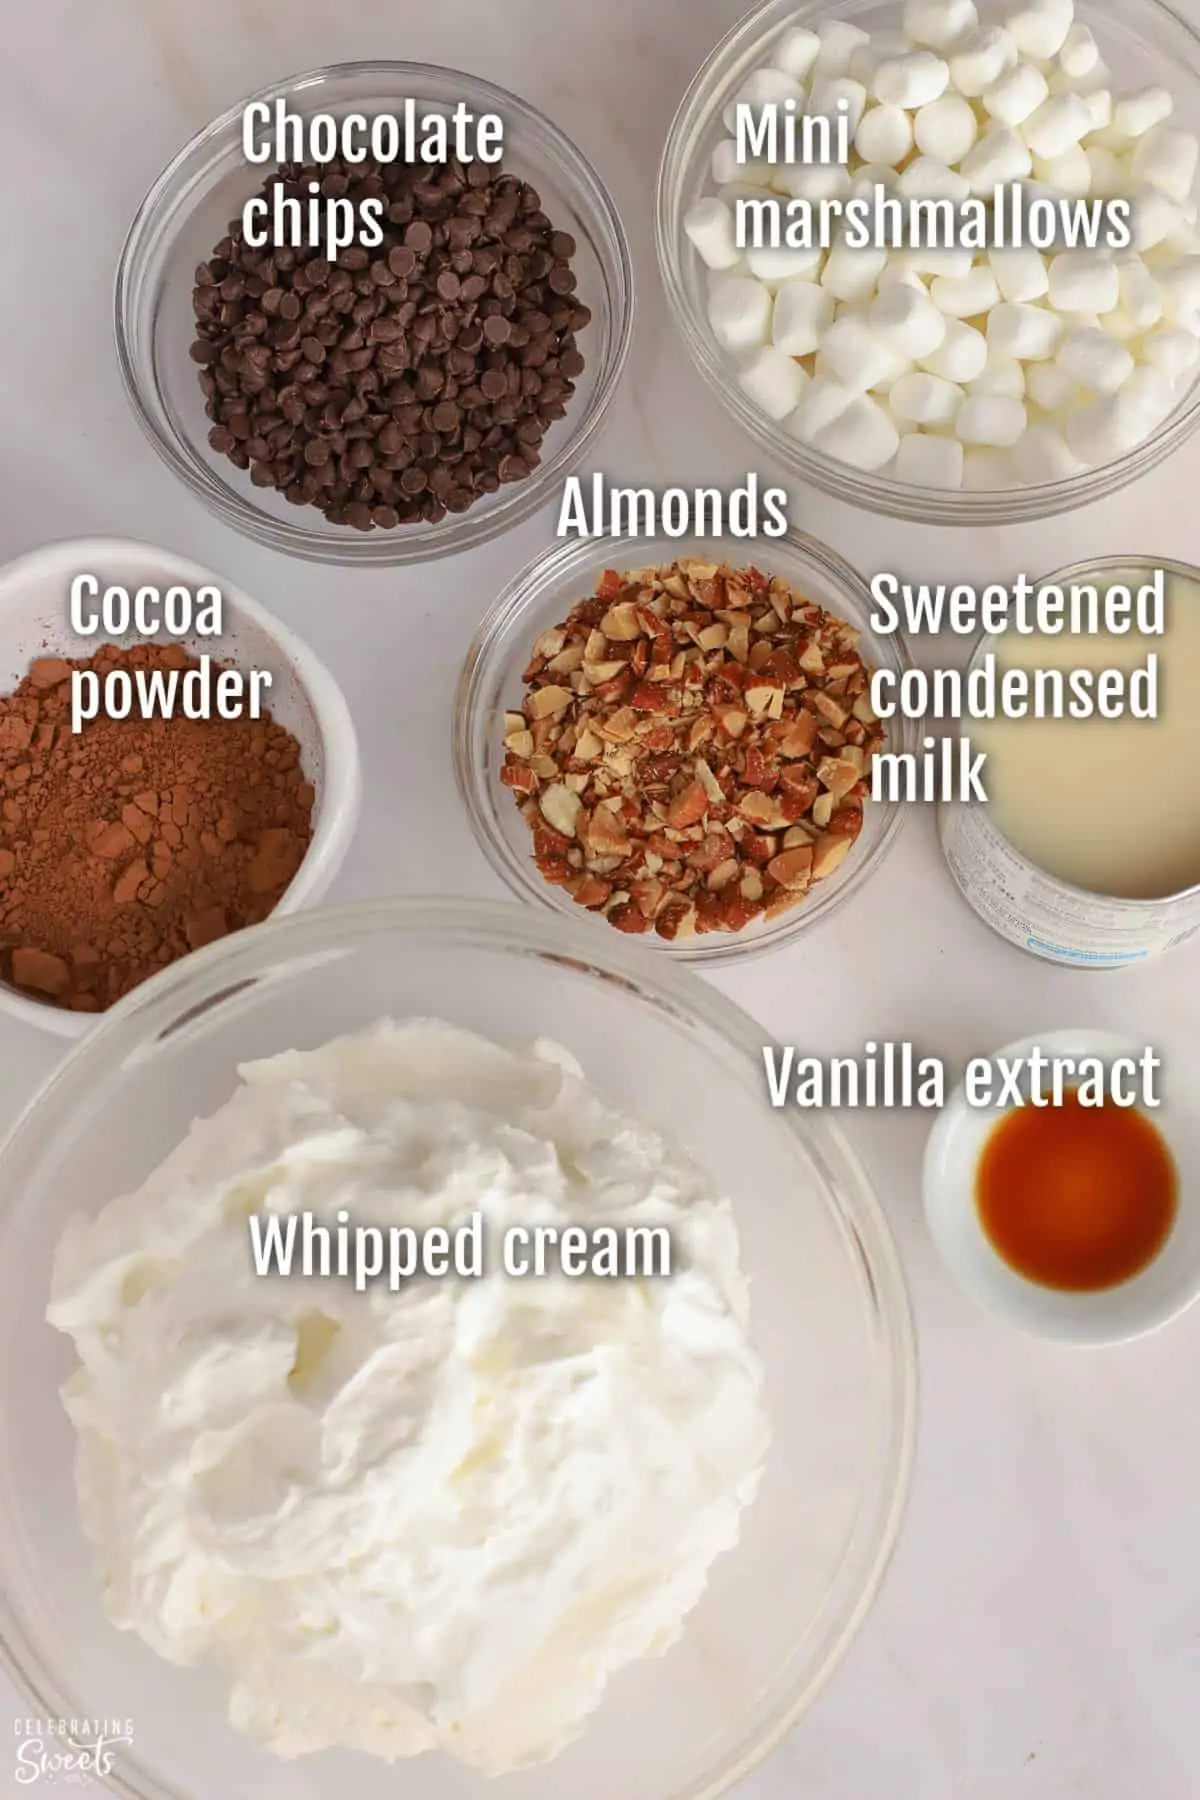 Ingredients for rocky road ice cream (nuts, cream, cocoa powder, chocolate chips, sweetened condensed milk)